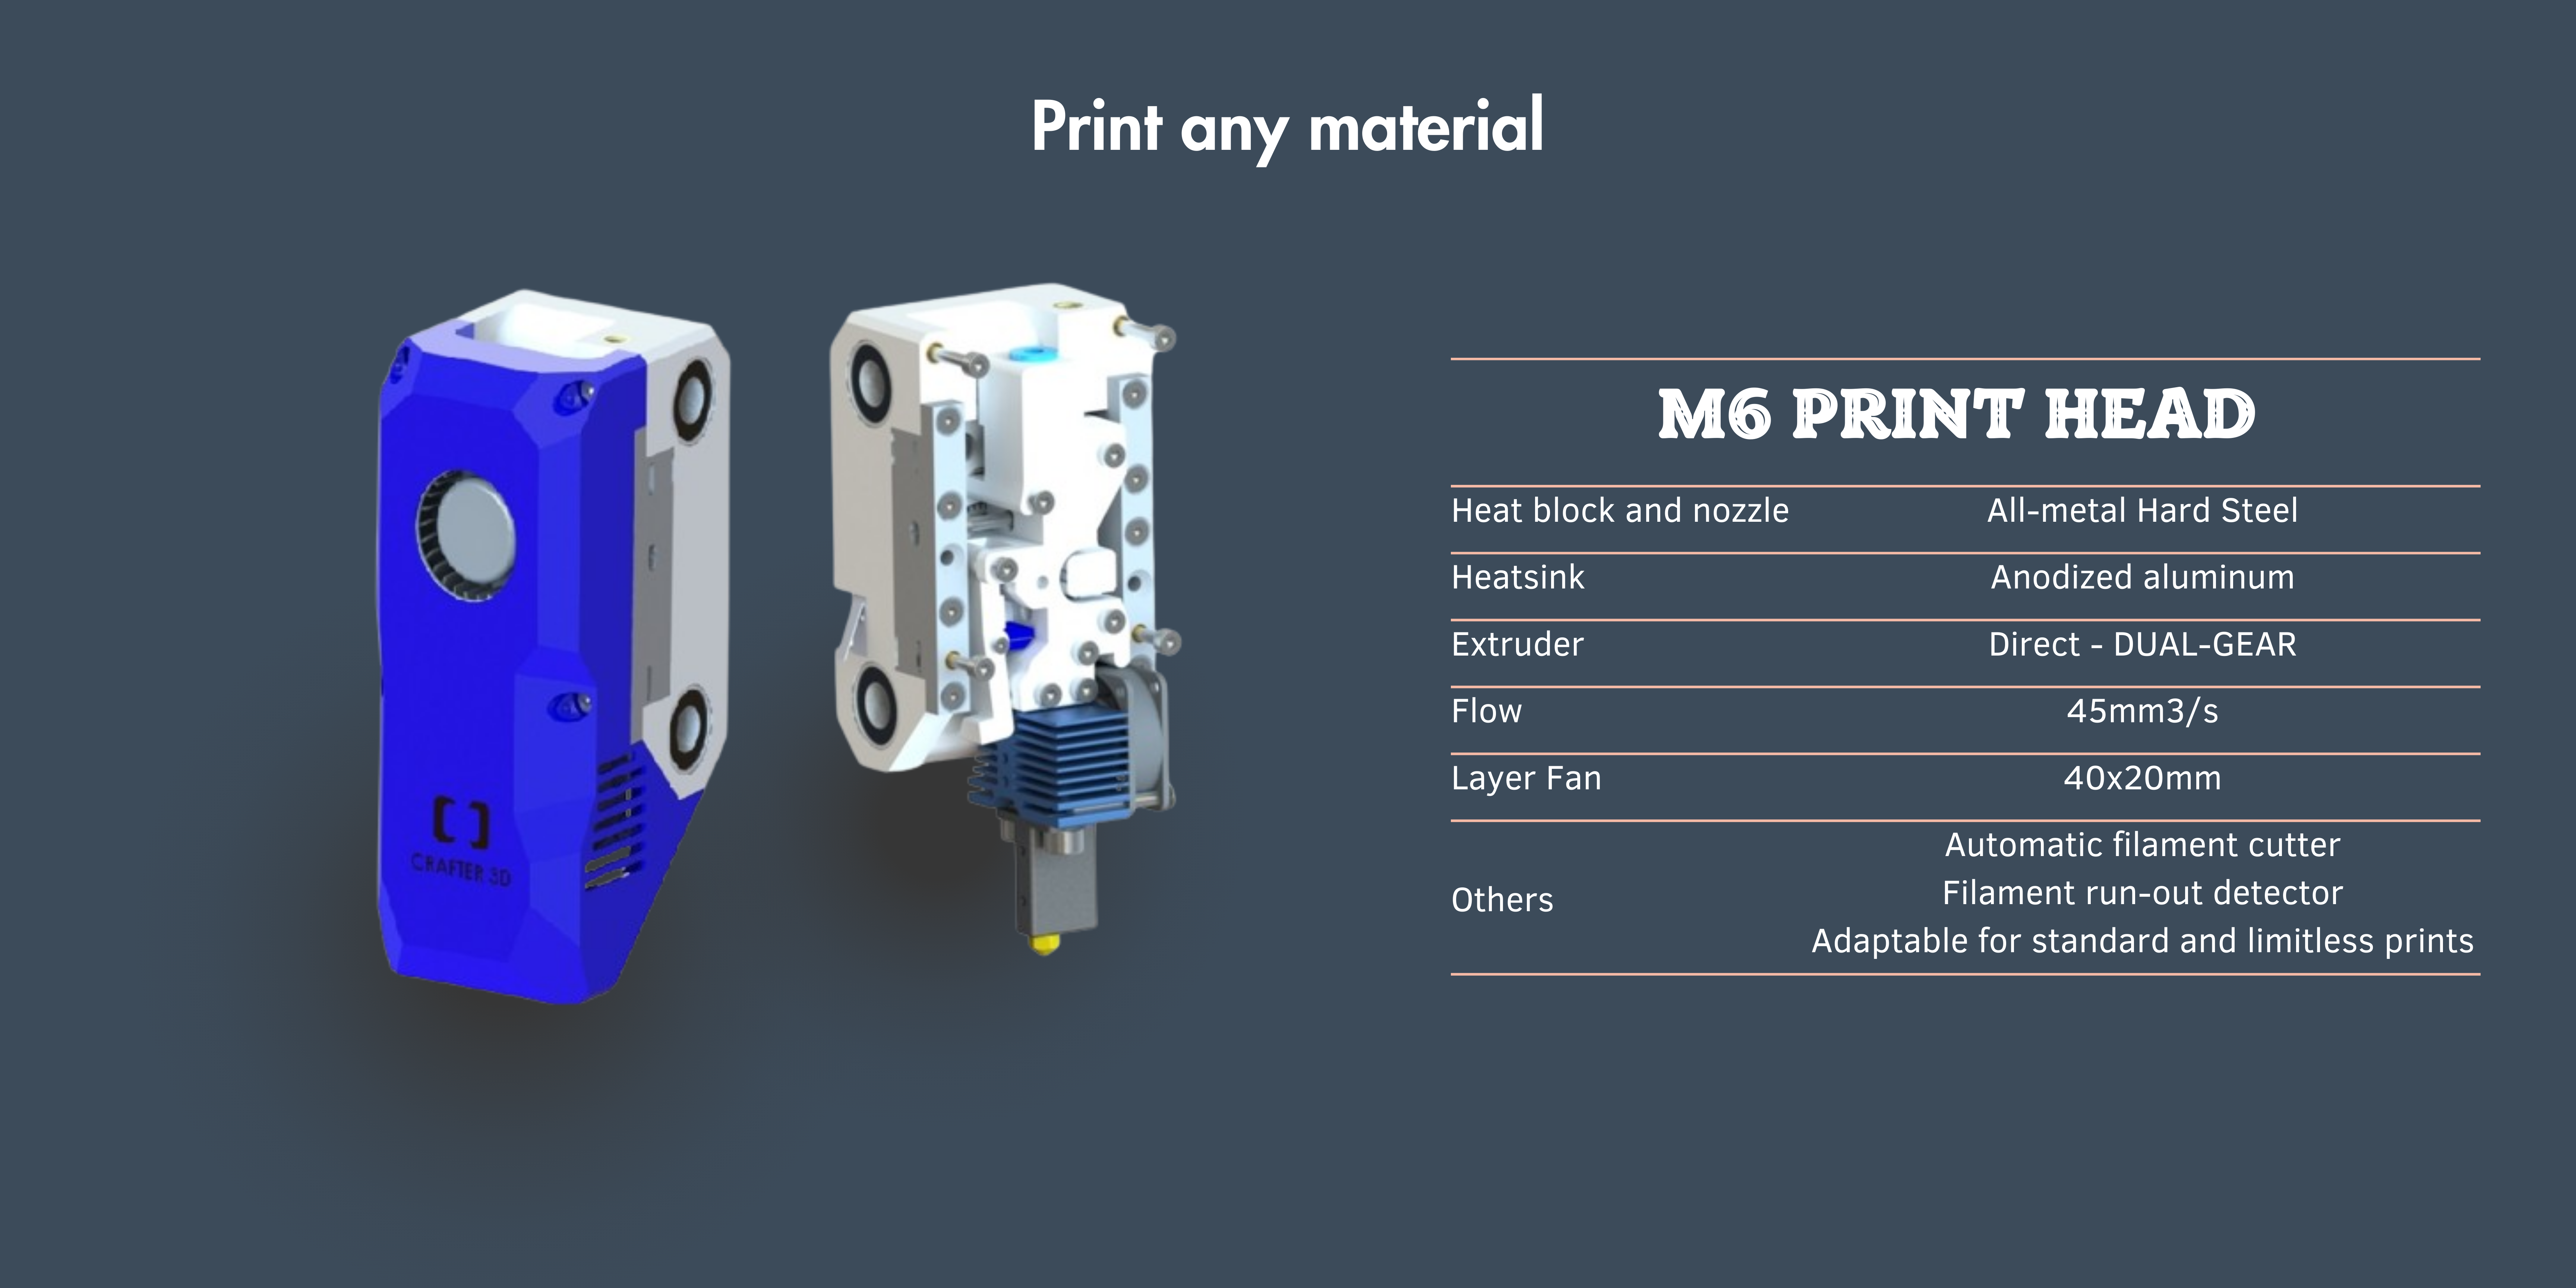 Print any material